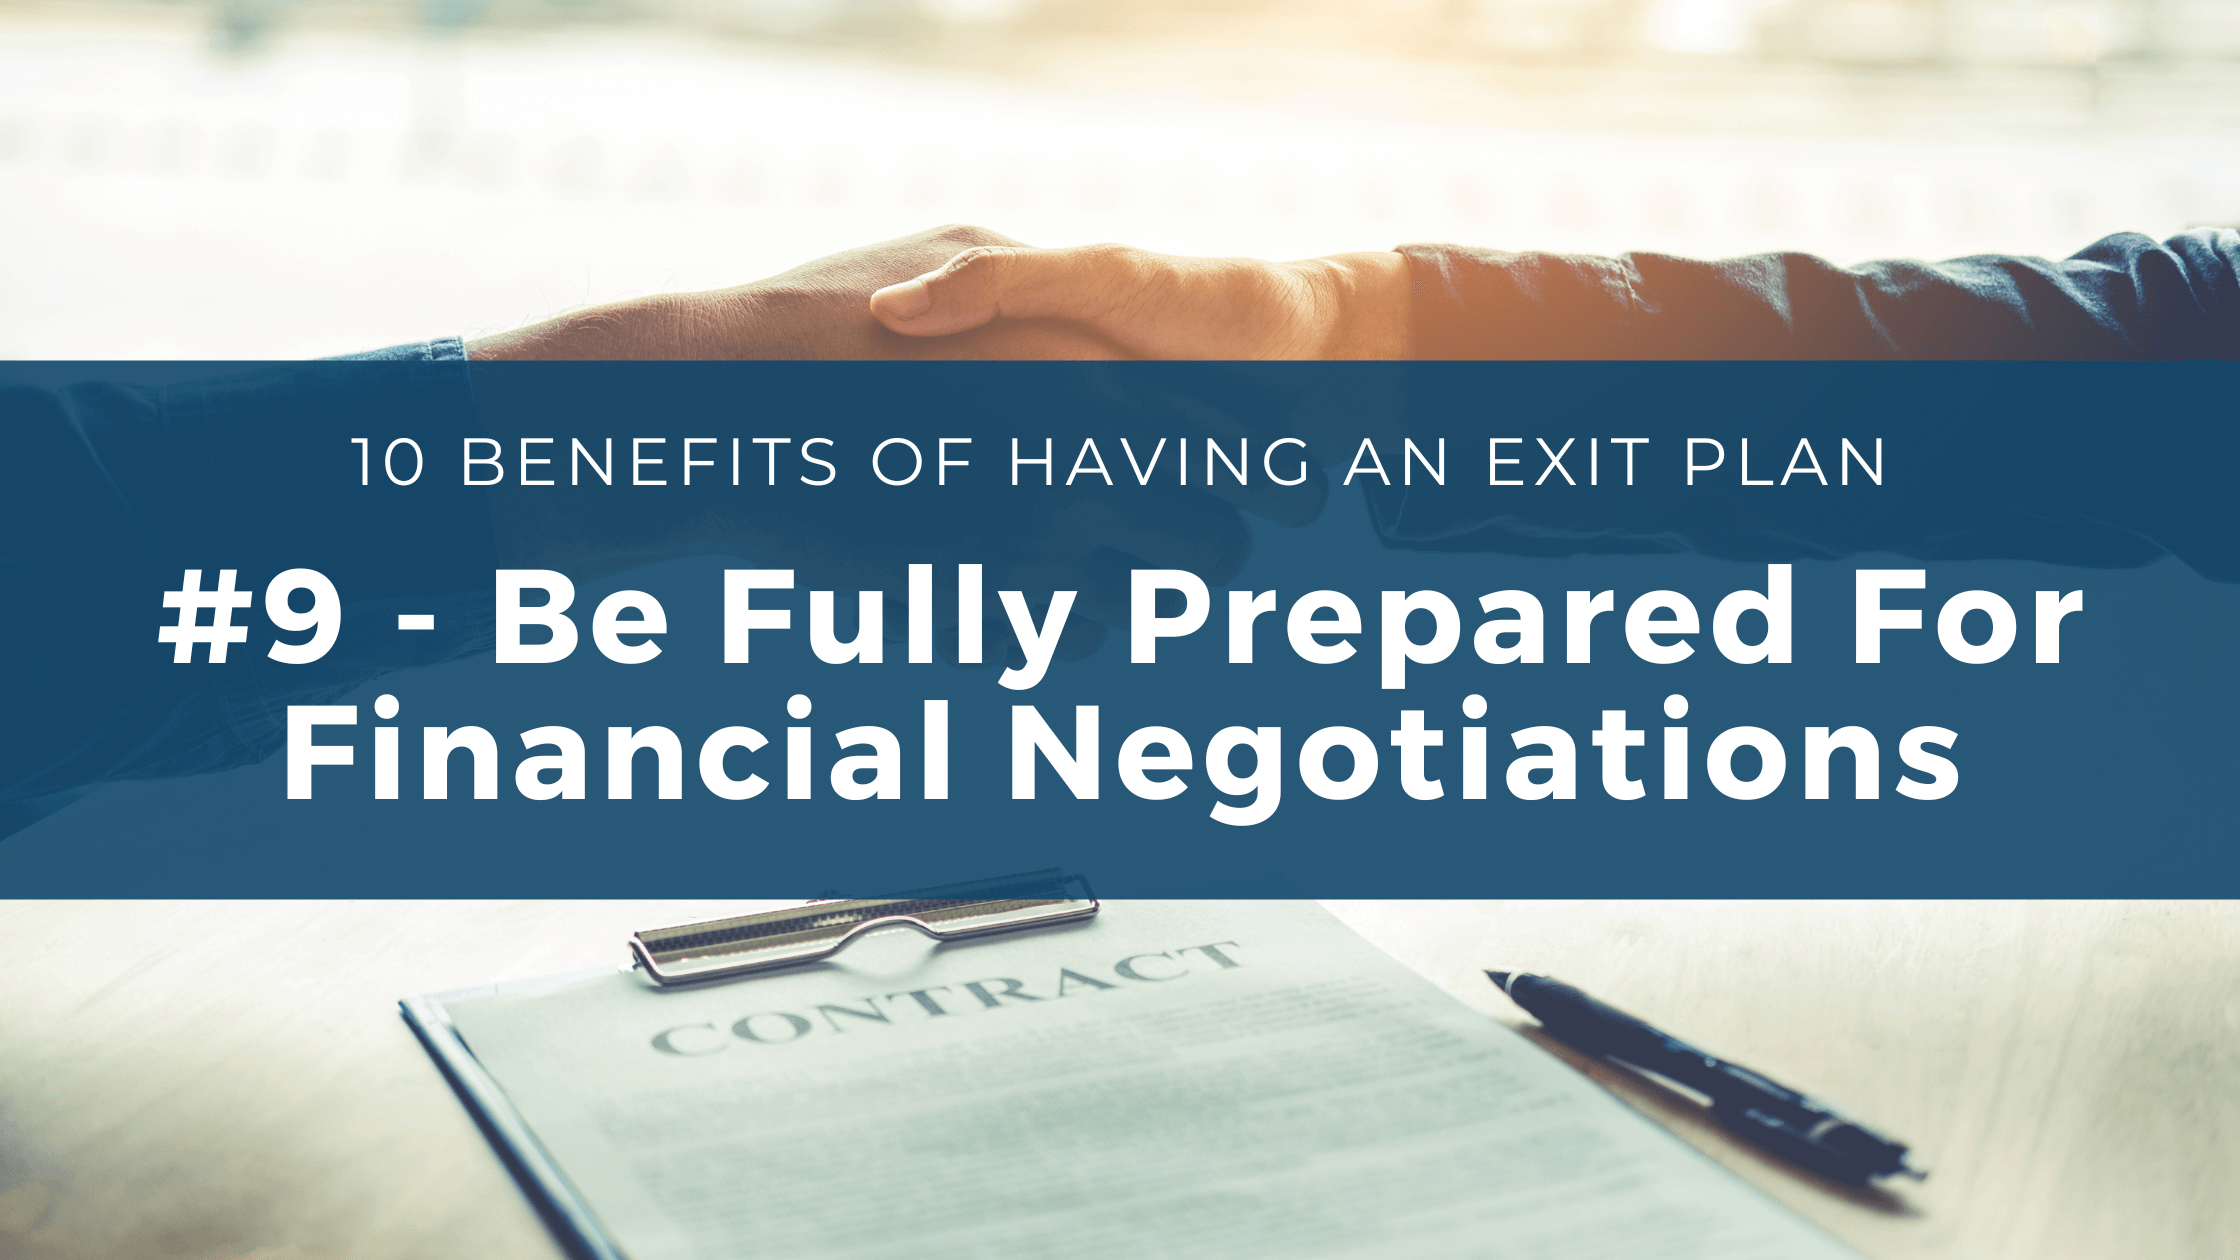 Be Fully Prepared For Financial Negotiations